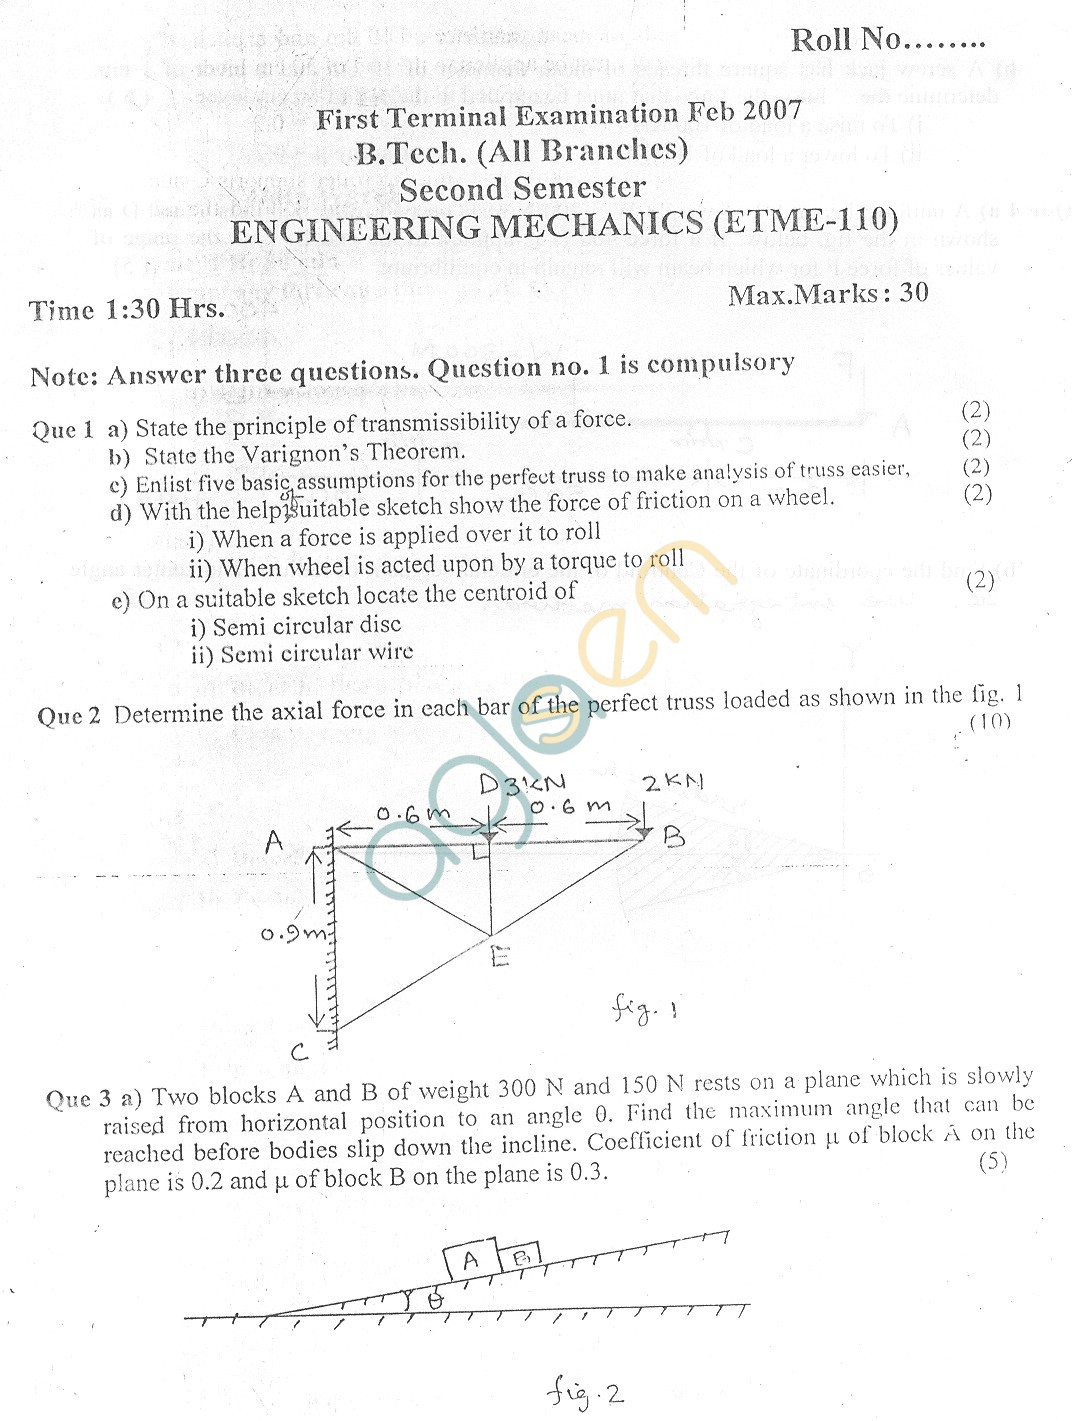 GGSIPU Question Papers Second Semester – First Term 2007 – ETME-110